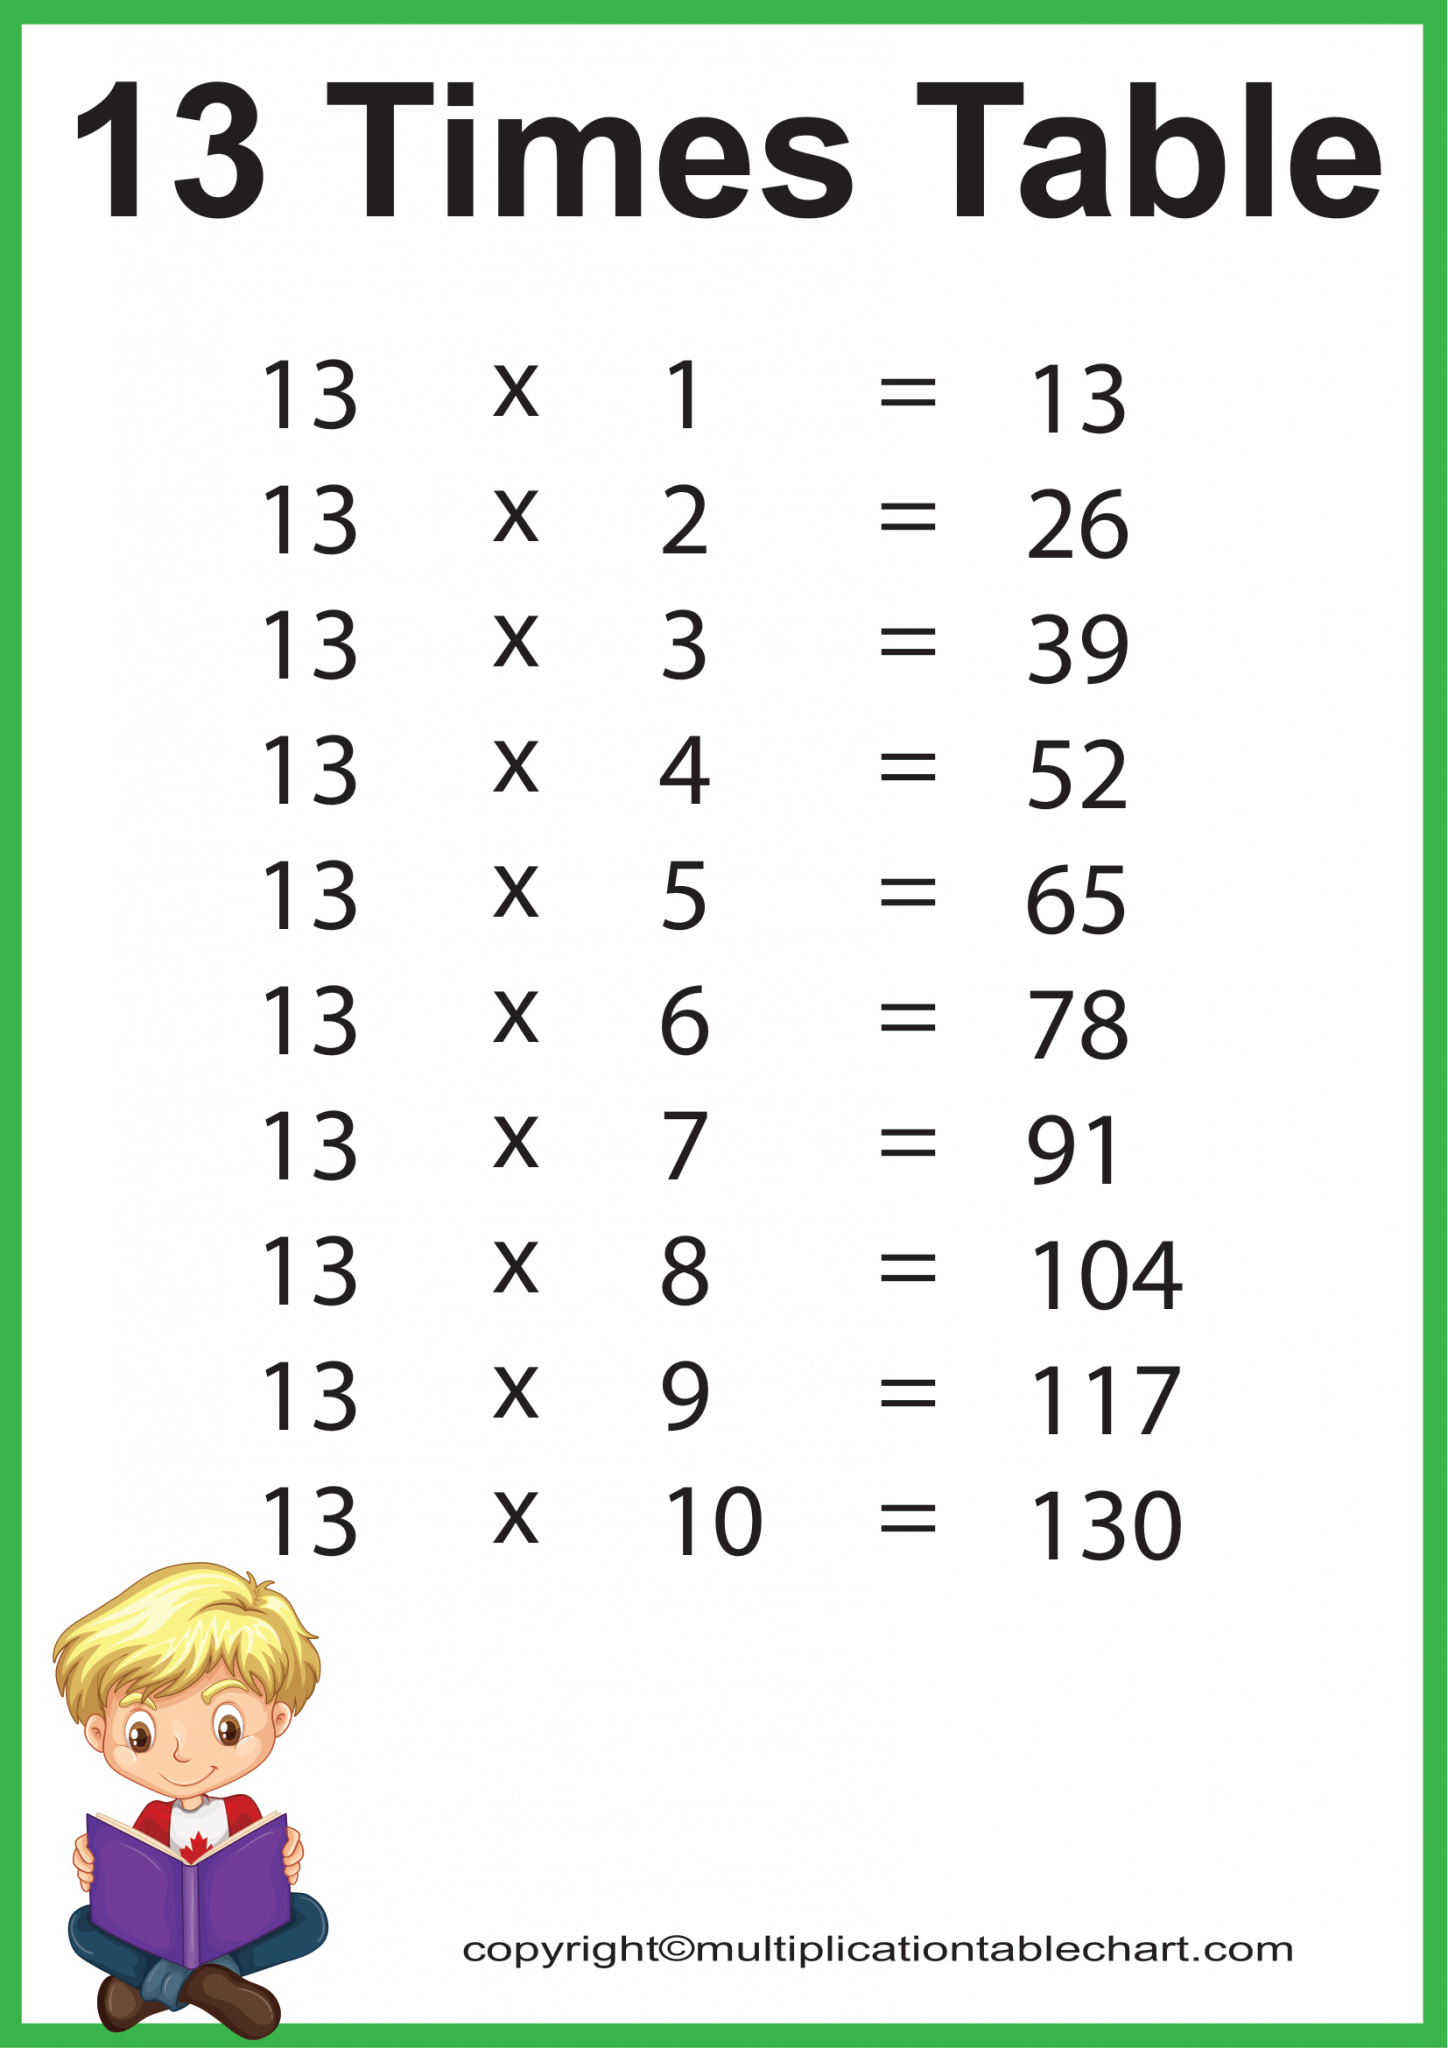 13 Times Table Multiplication Table 1739